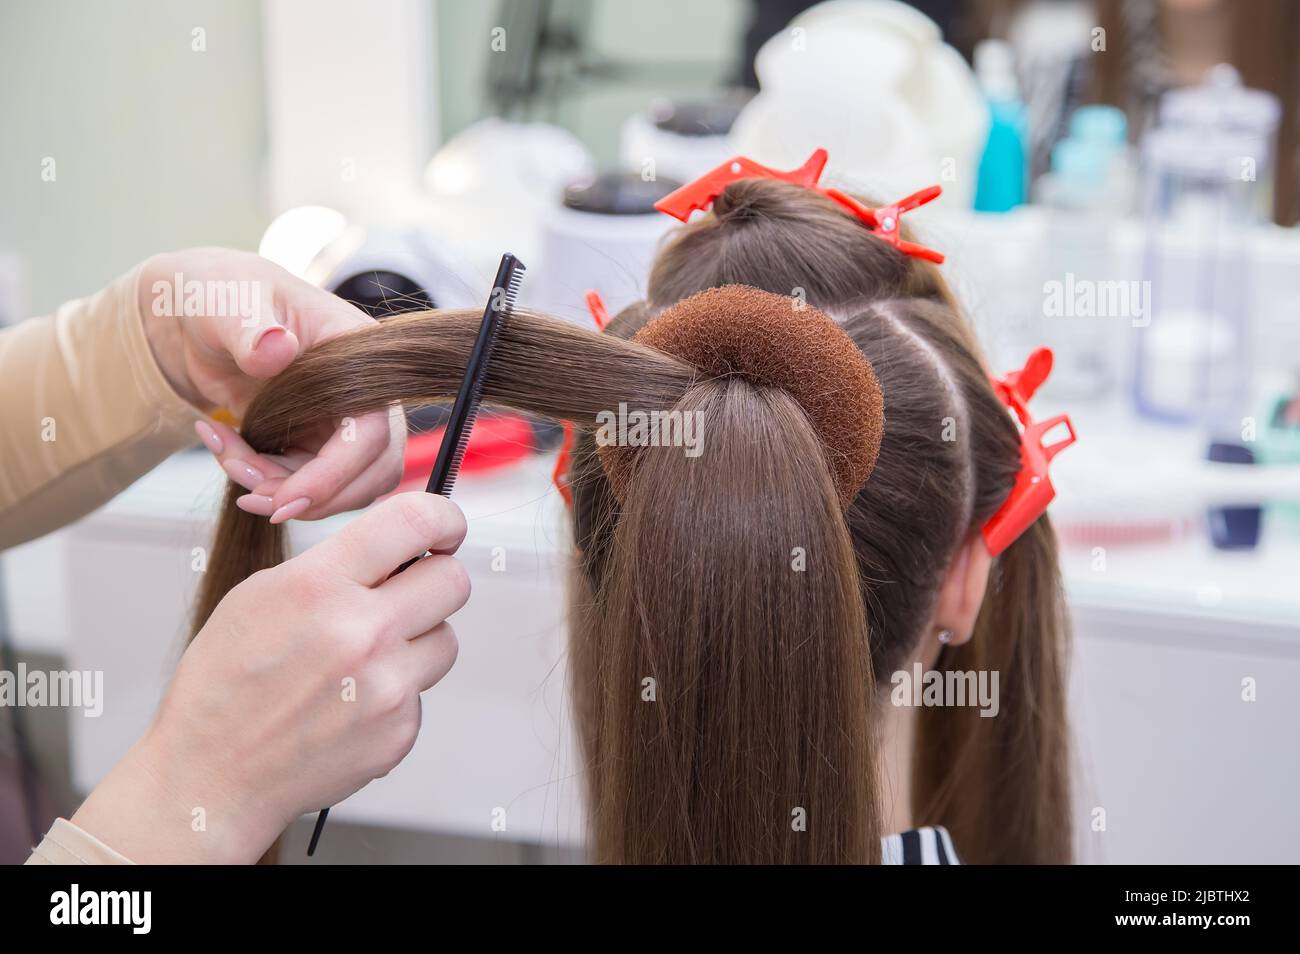 Close-up of the master's hands combing a lock of hair on a woman's head. The hairdresser makes a hairstyle for a young woman. Barber shop, business concept. Beauty salon, hair care. Stock Photo